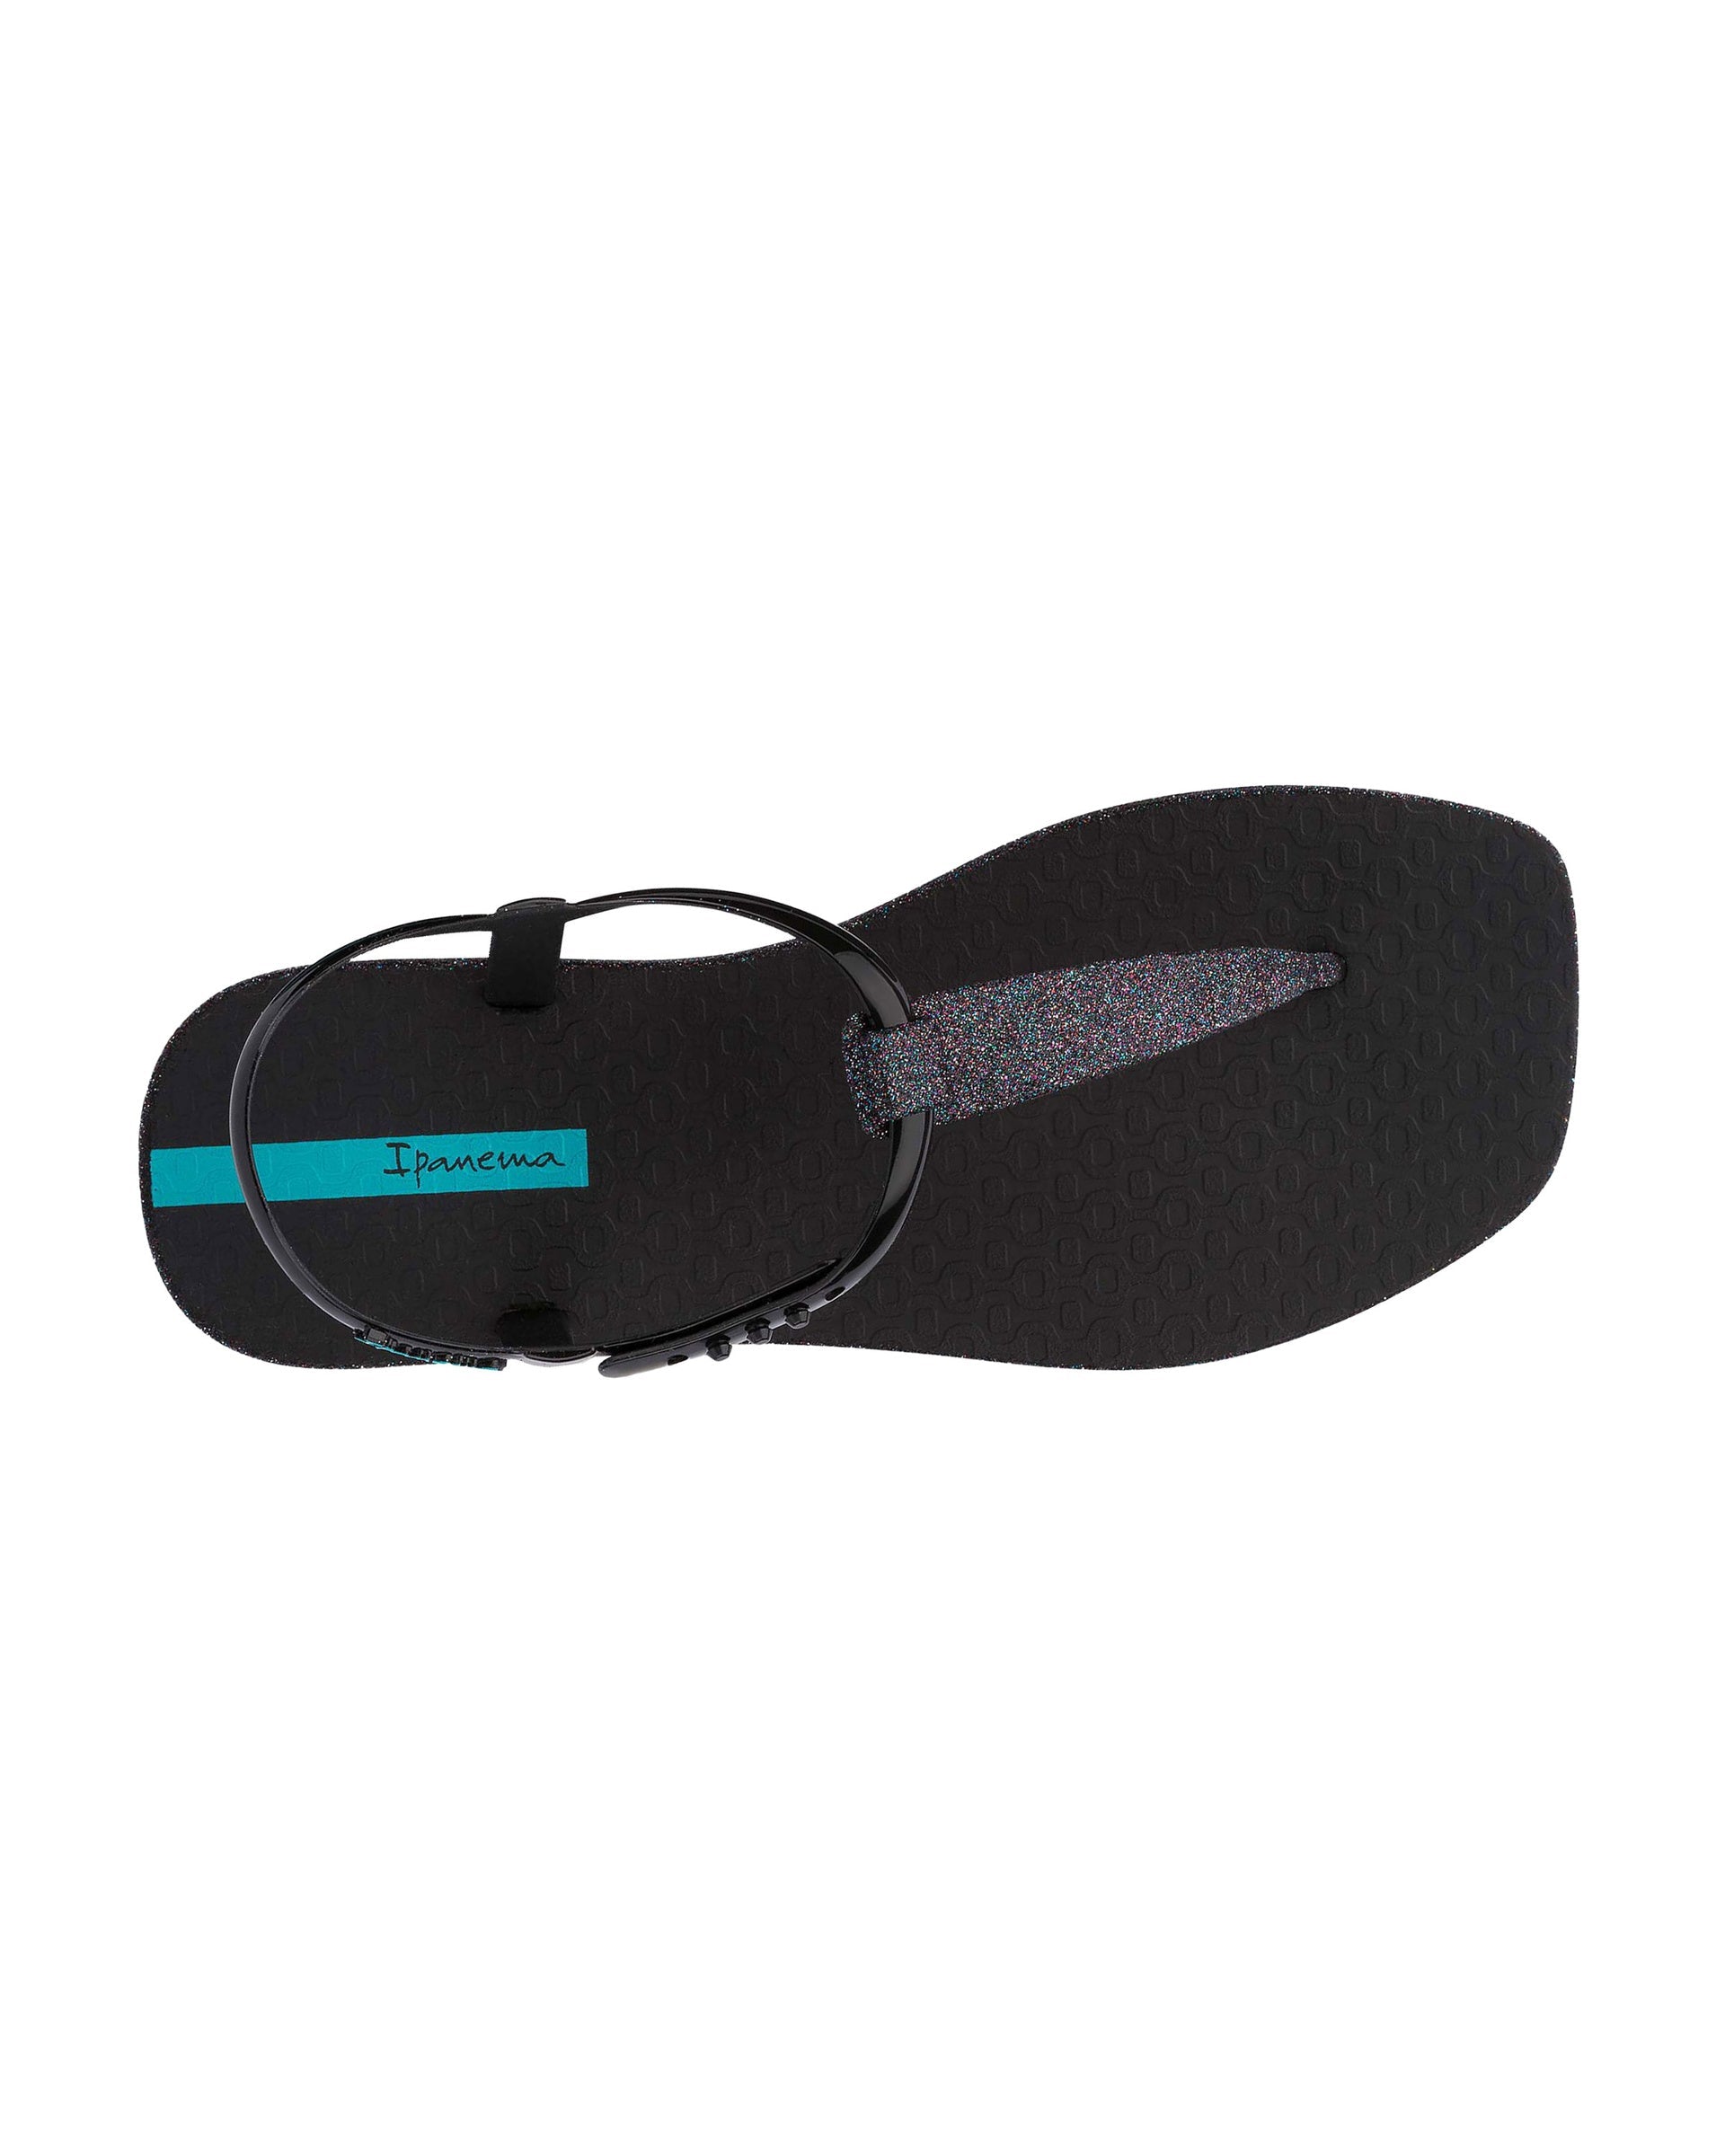 Top view of a black Ipanema Class Edge Glow t-strap women's sandal with glitter black thong.